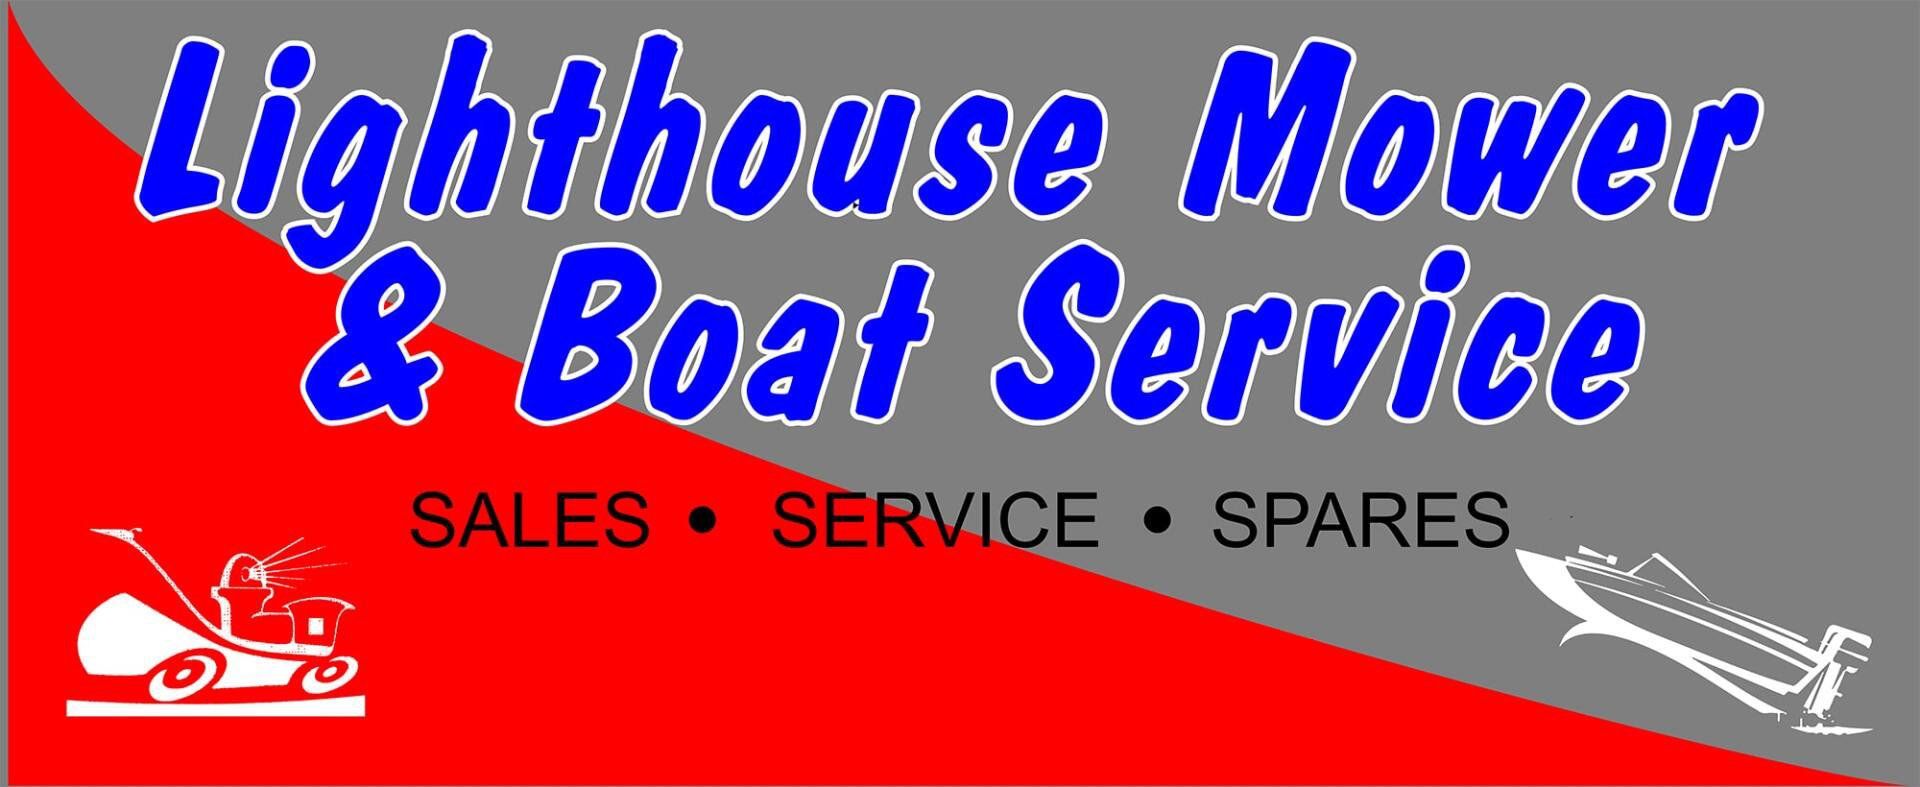 Lighthouse Mower & Boat Service: Outdoor Motor Specialist in Port Macquarie